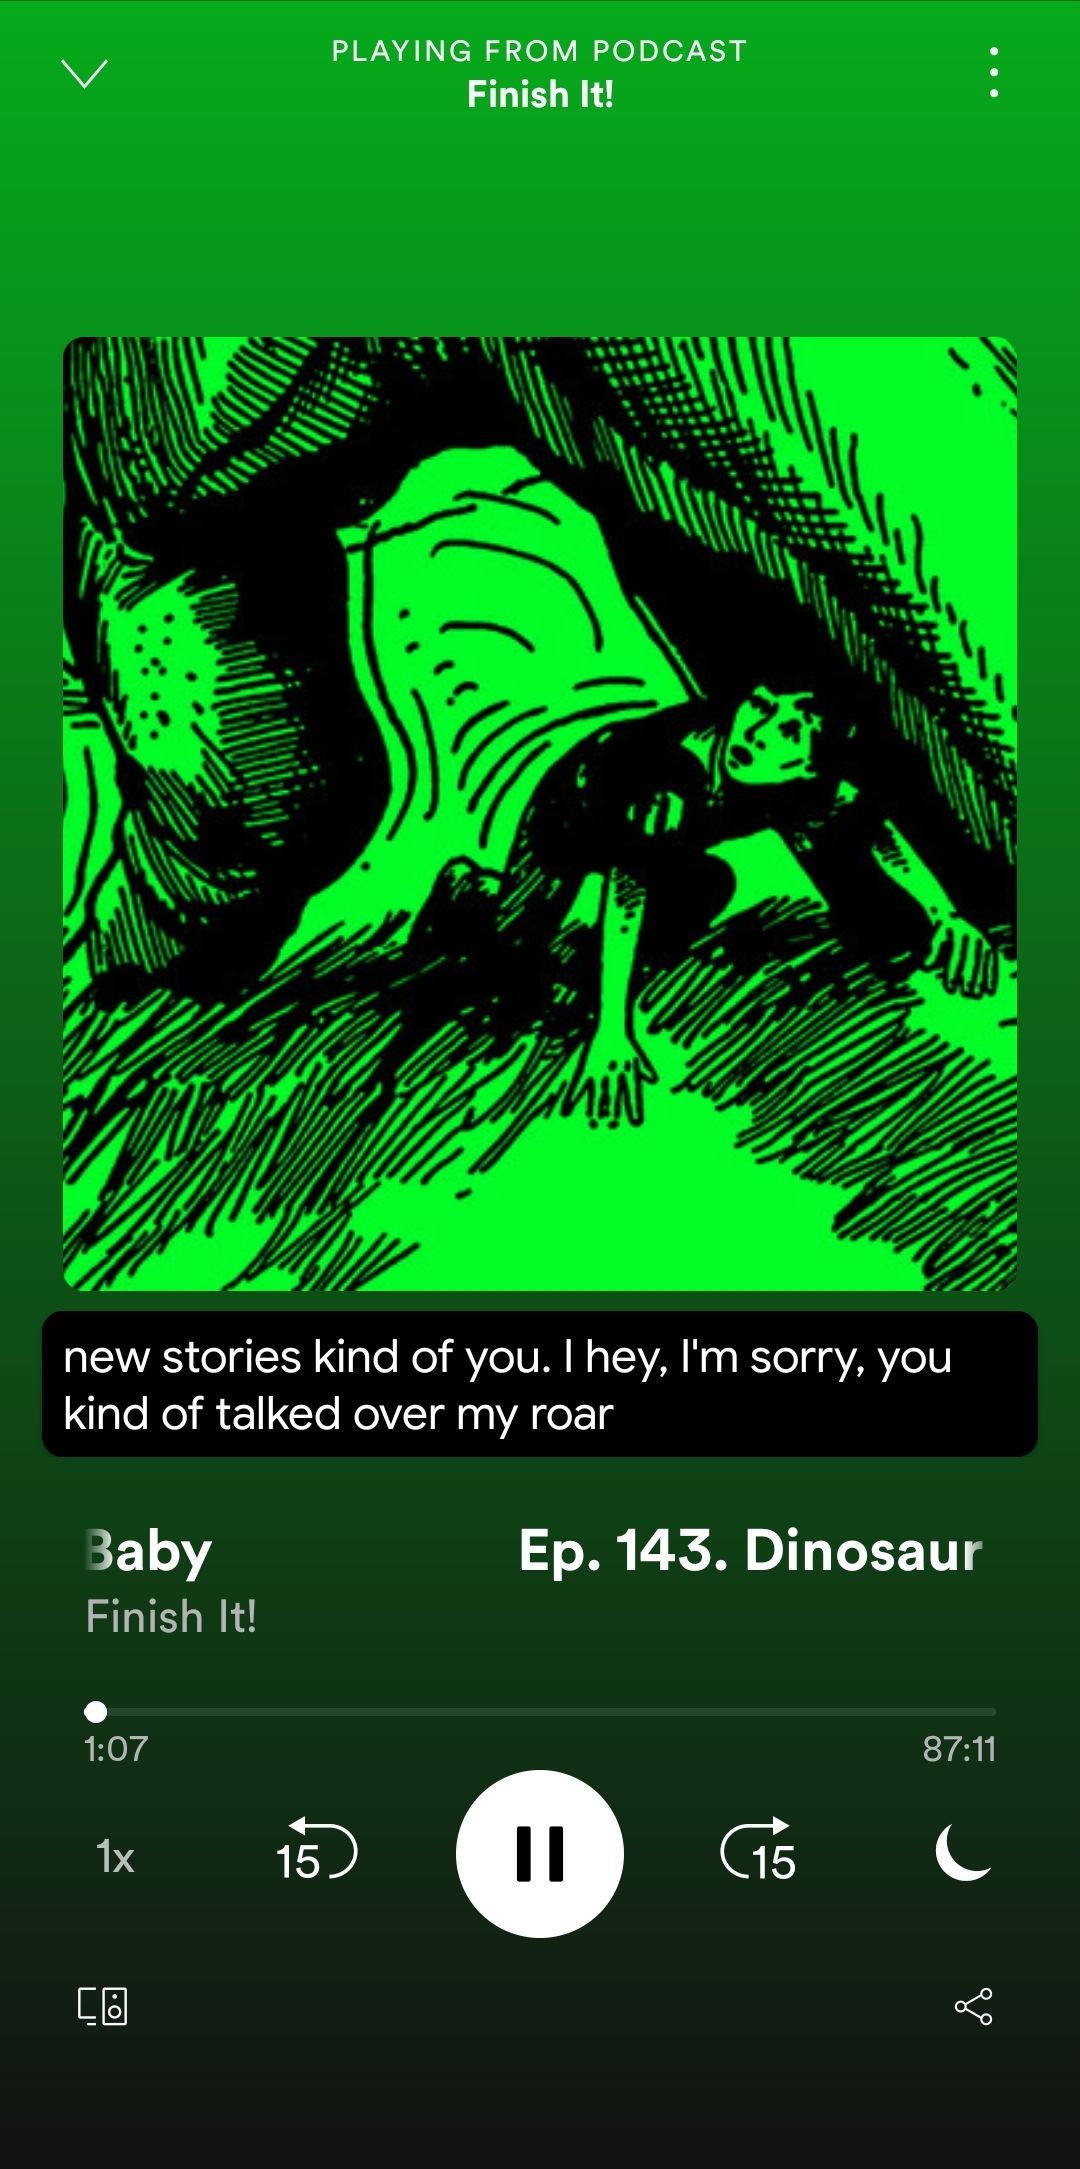 Android's live caption transcribes the Finish It! Podcast even when the Yule brothers speak over each other.